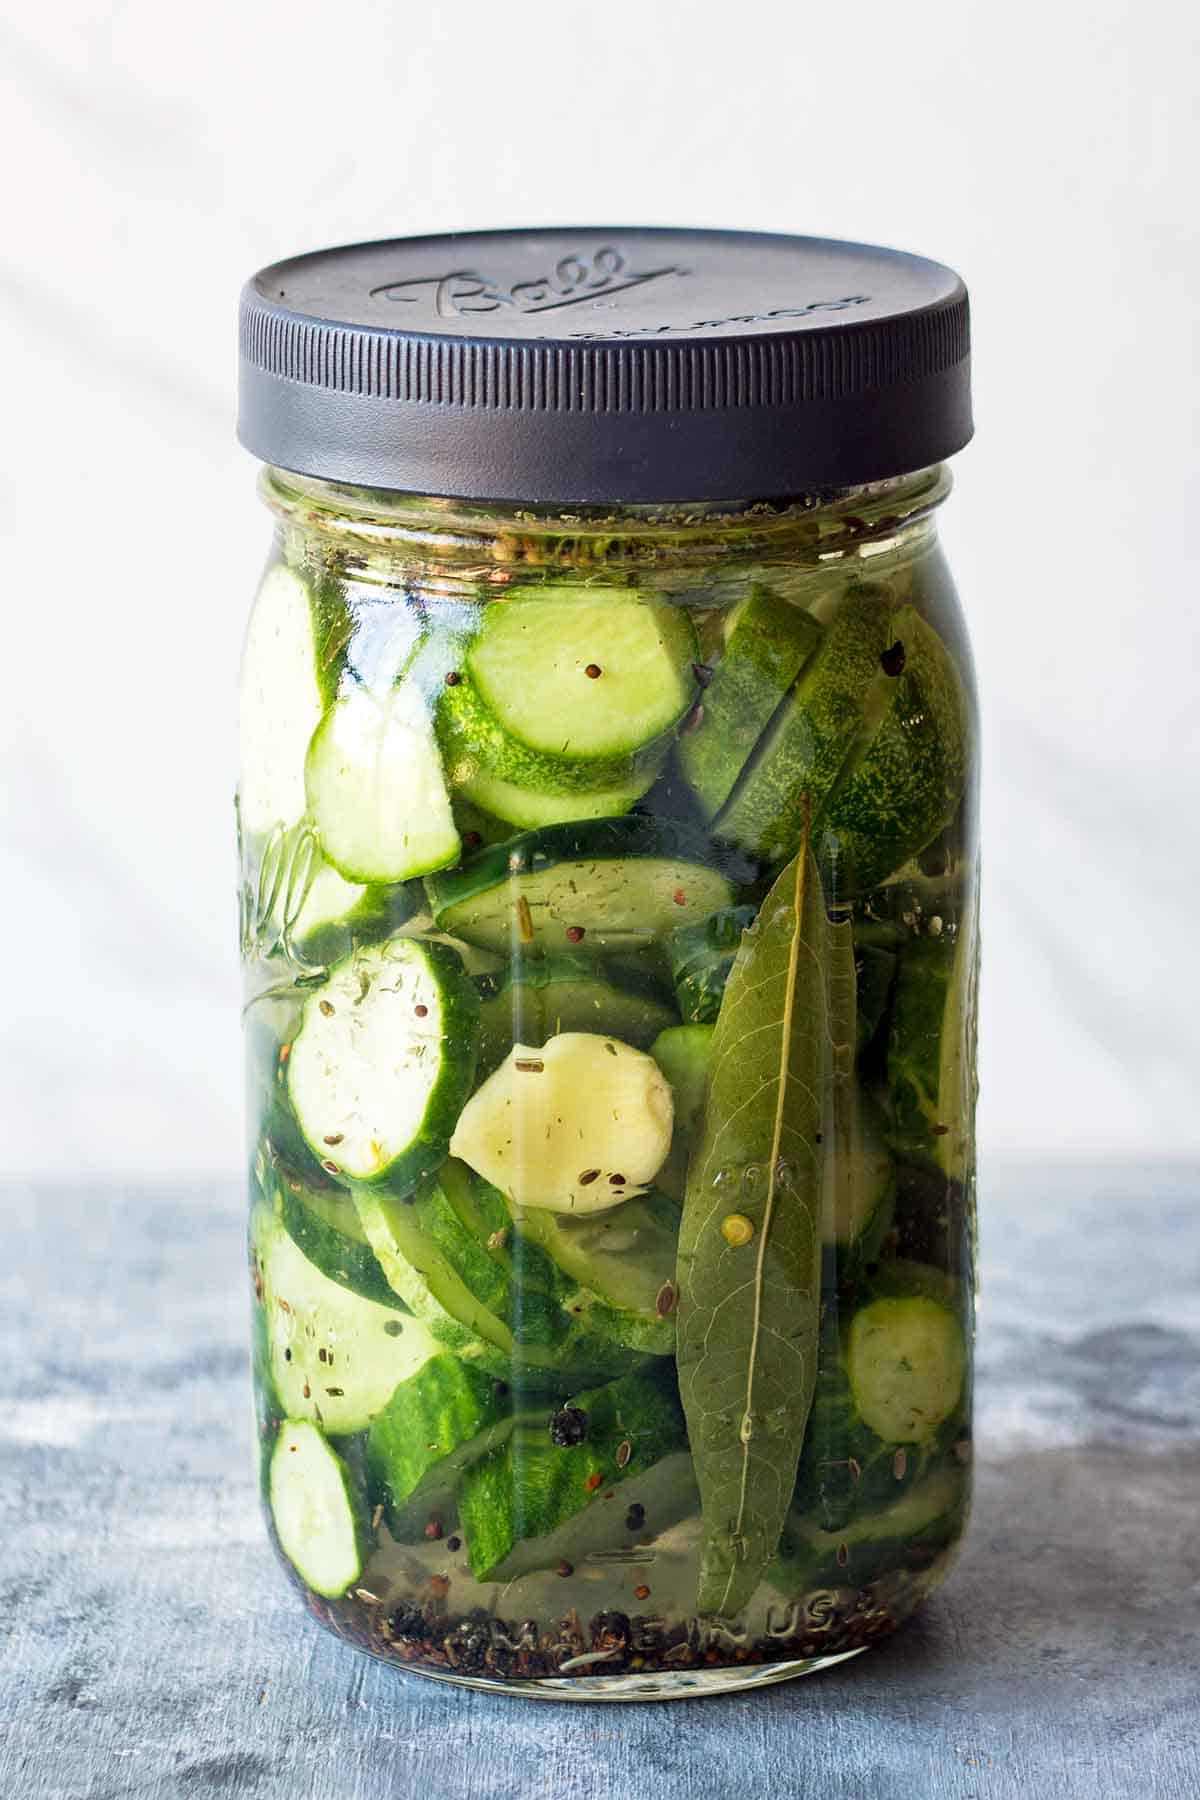 Jar of Dill Pickles before refrigeration